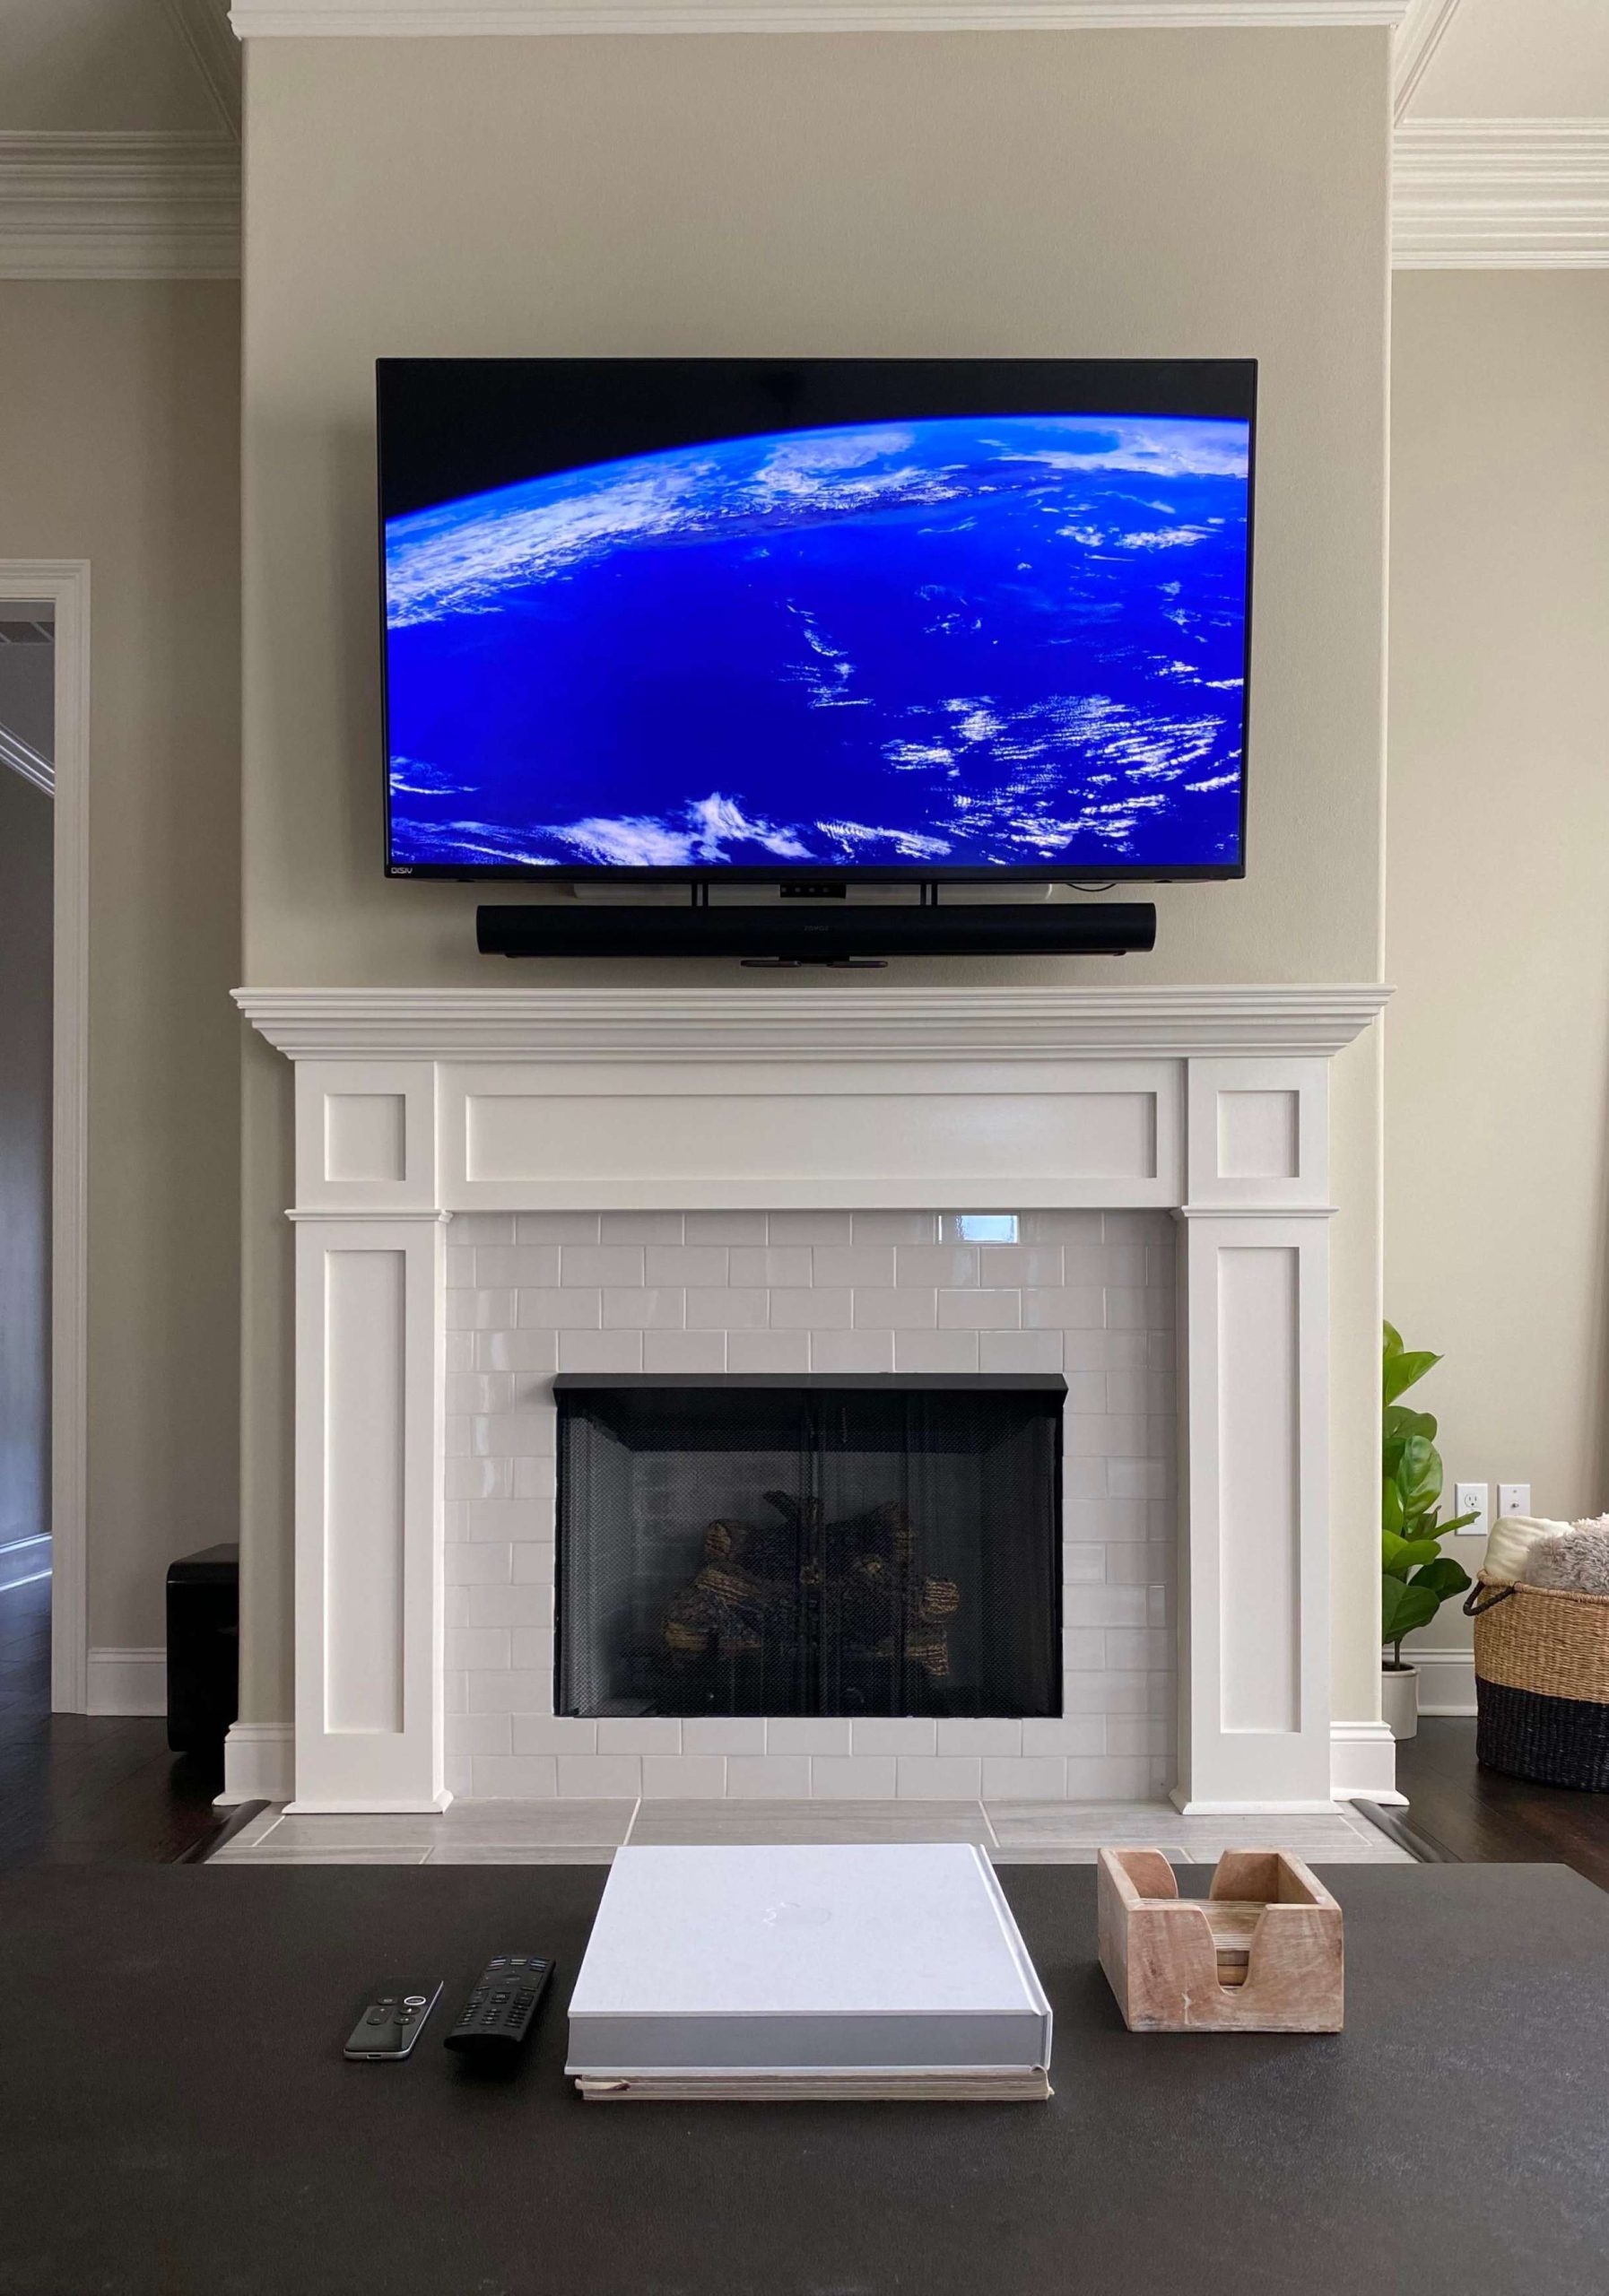 Mounting a TV Above a Fireplace -  Things To Consider